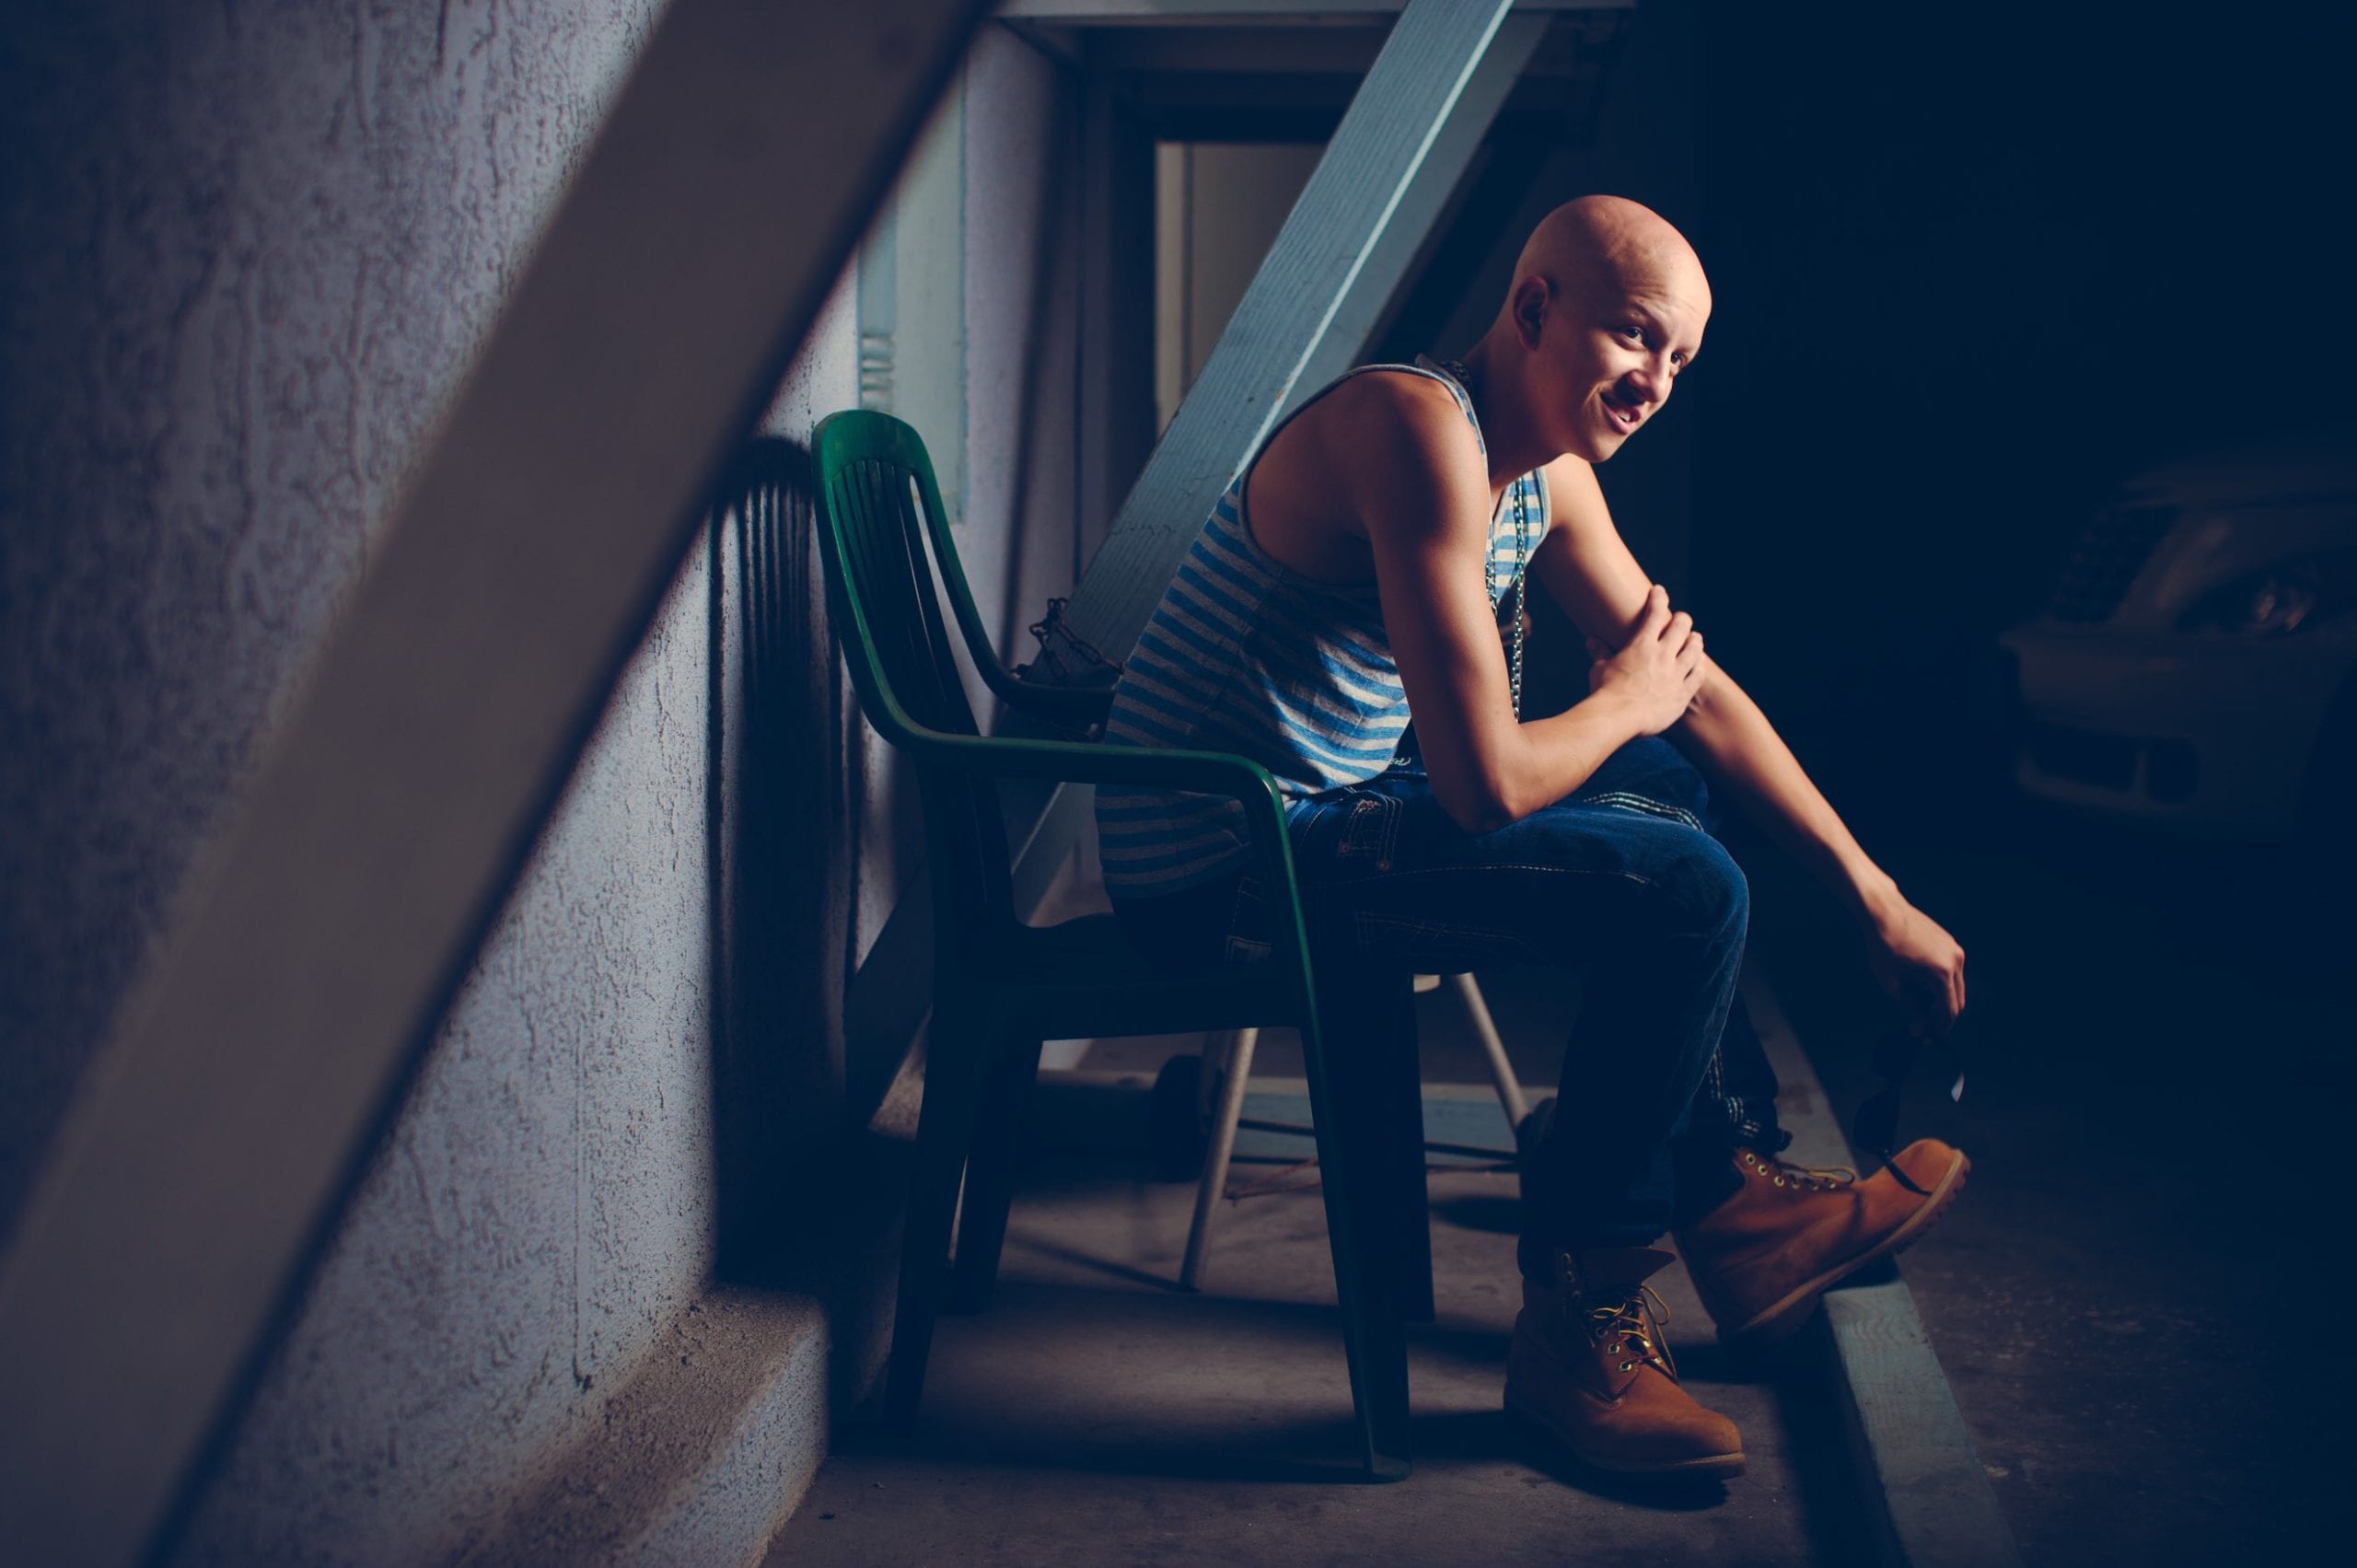 Bald young man sitting on a green plastic chair facing the camera sideways. He is wearing a blue and white striped tank top with metal necklace along with leather workman's boots.